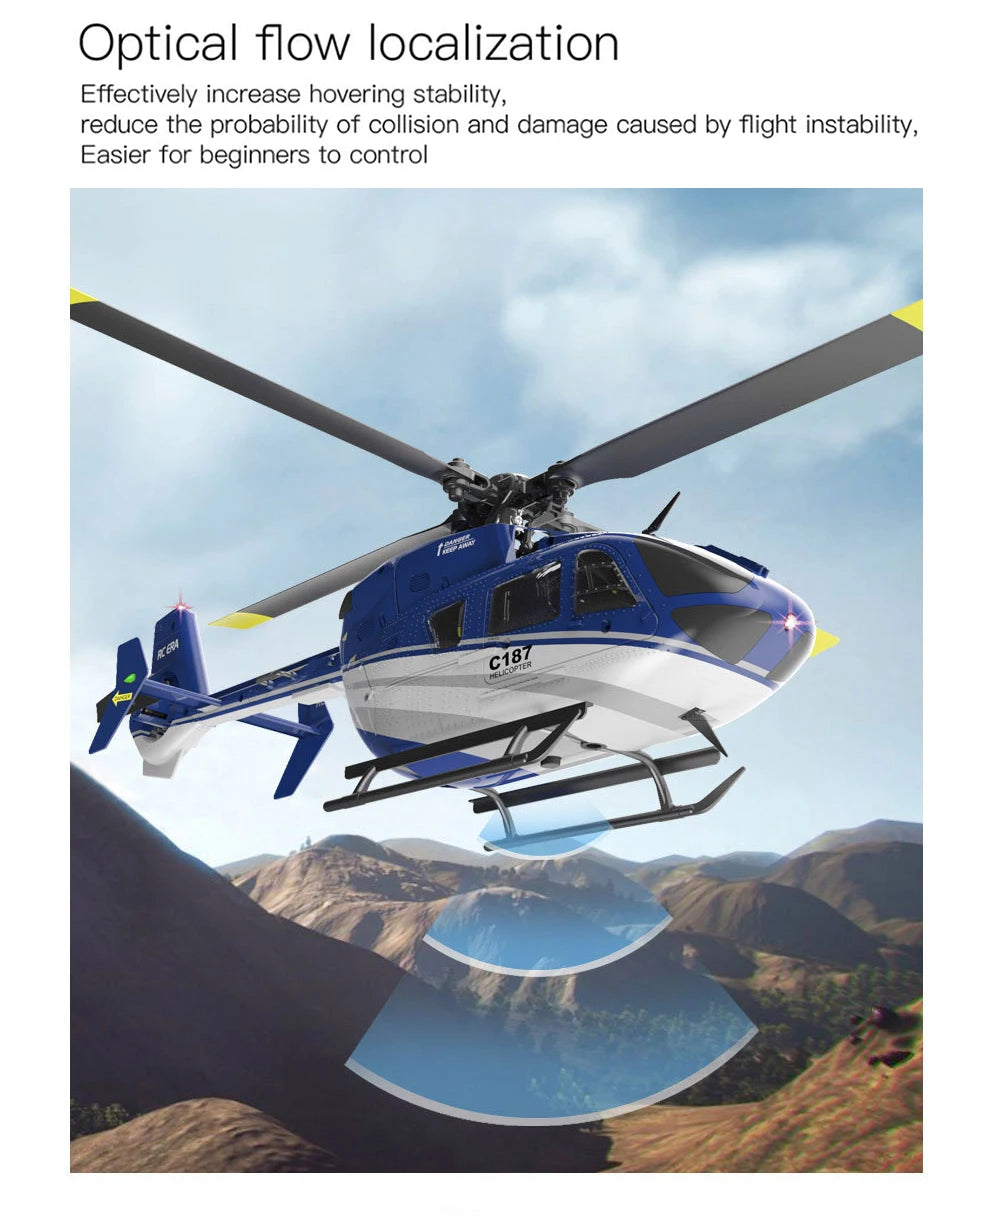 RC ERA C187 Rc Helicopter, Optical flow localization increases hovering stability, reduces the probability of collision .